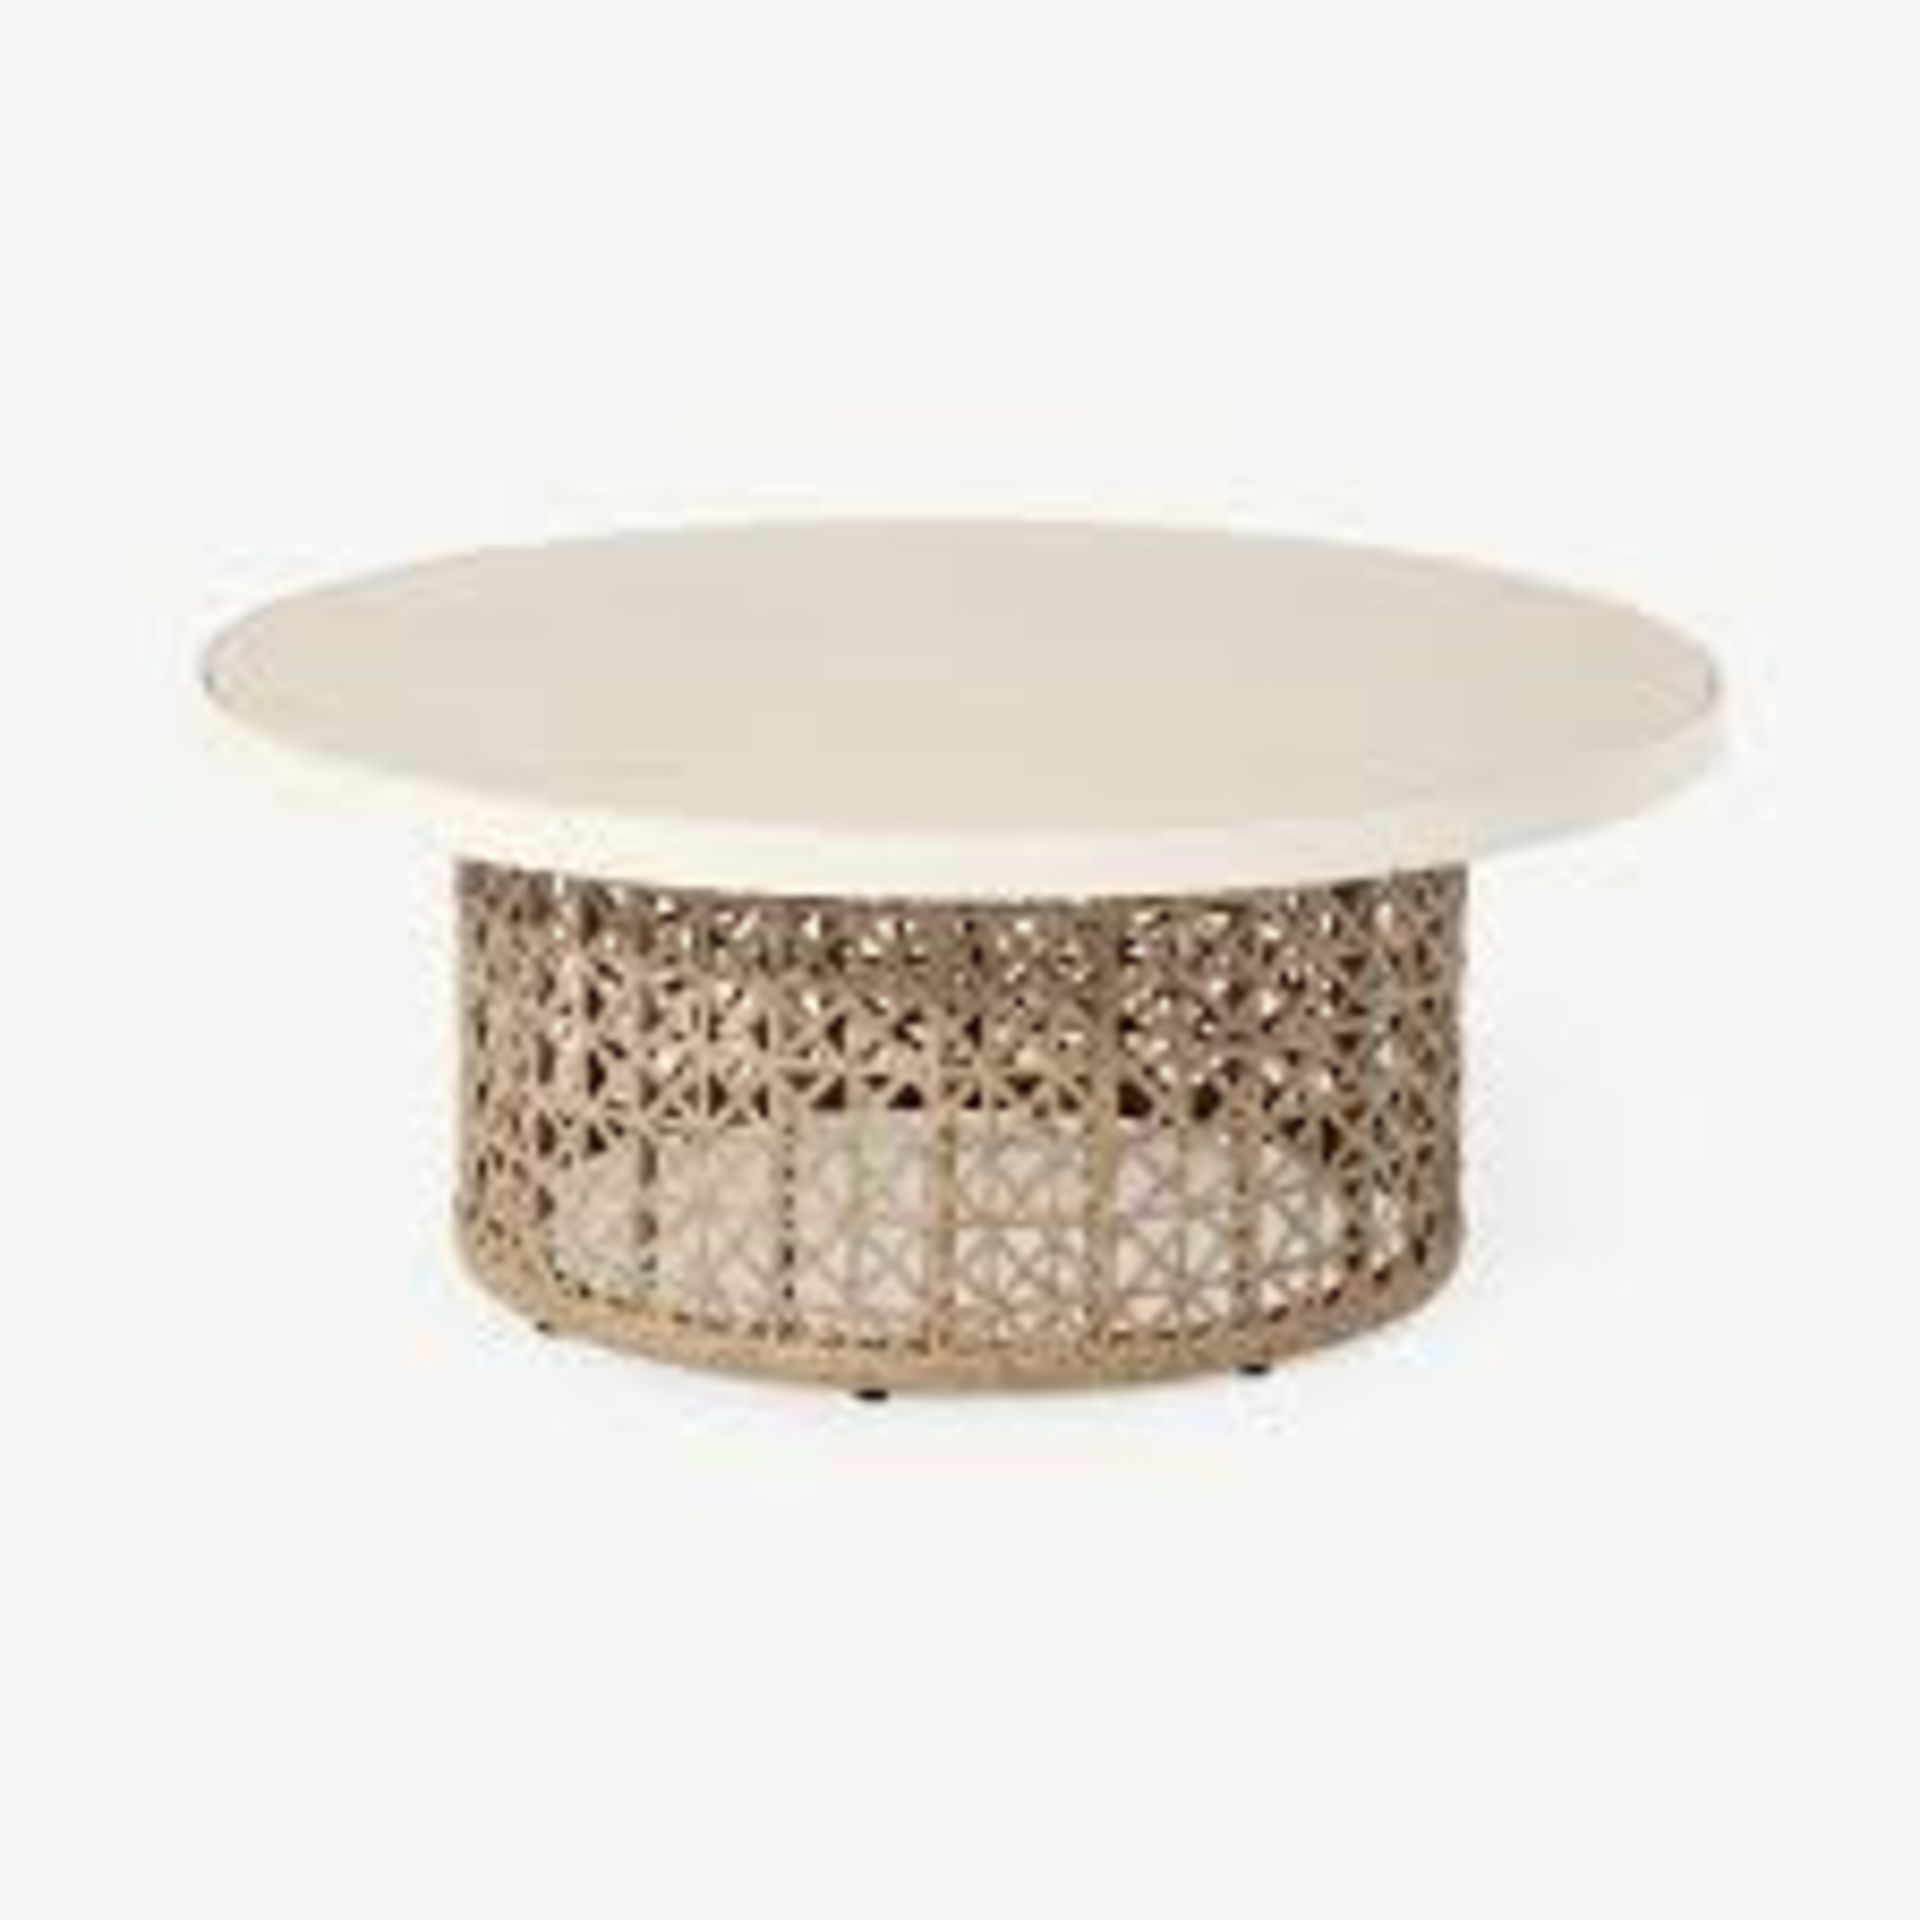 BRAND NEW Made.com Rhonda Round Coffee Table - Natural Stone + Polyweave. RRP £350.00. - Image 2 of 2